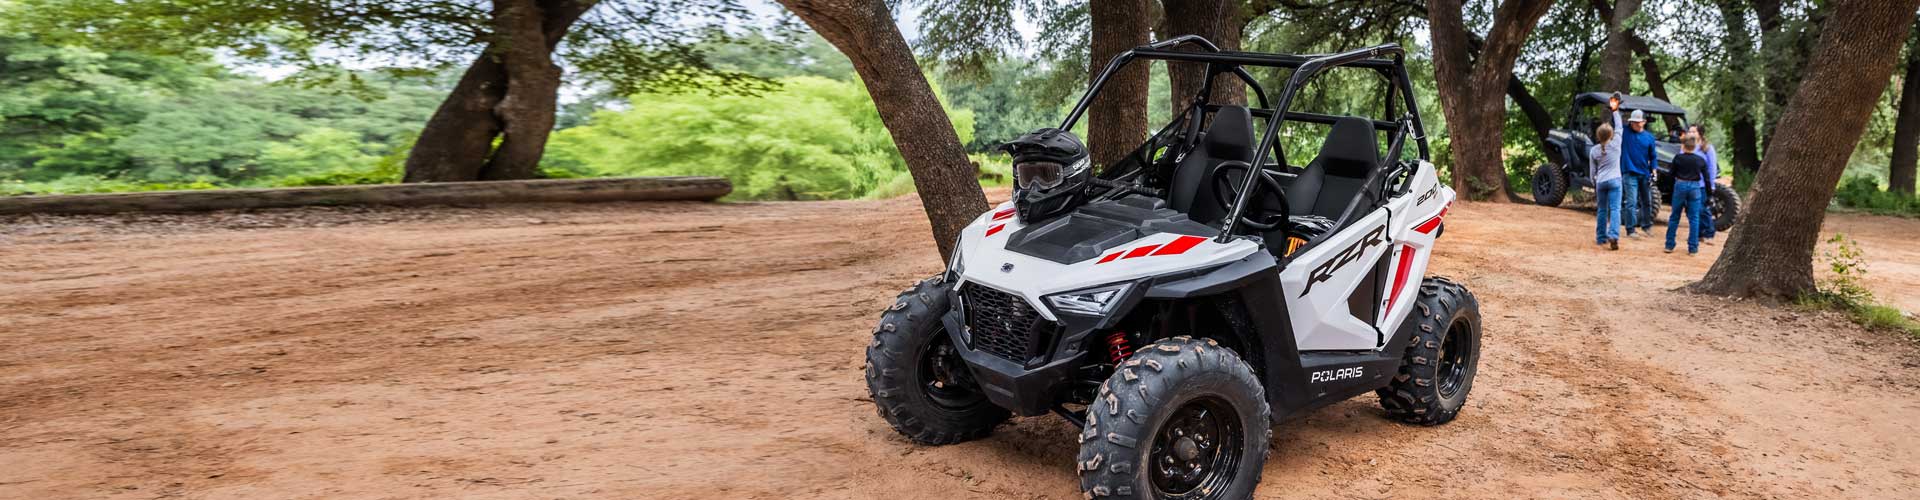 INTRODUCING THE ALL-NEW RZR 200 EFI